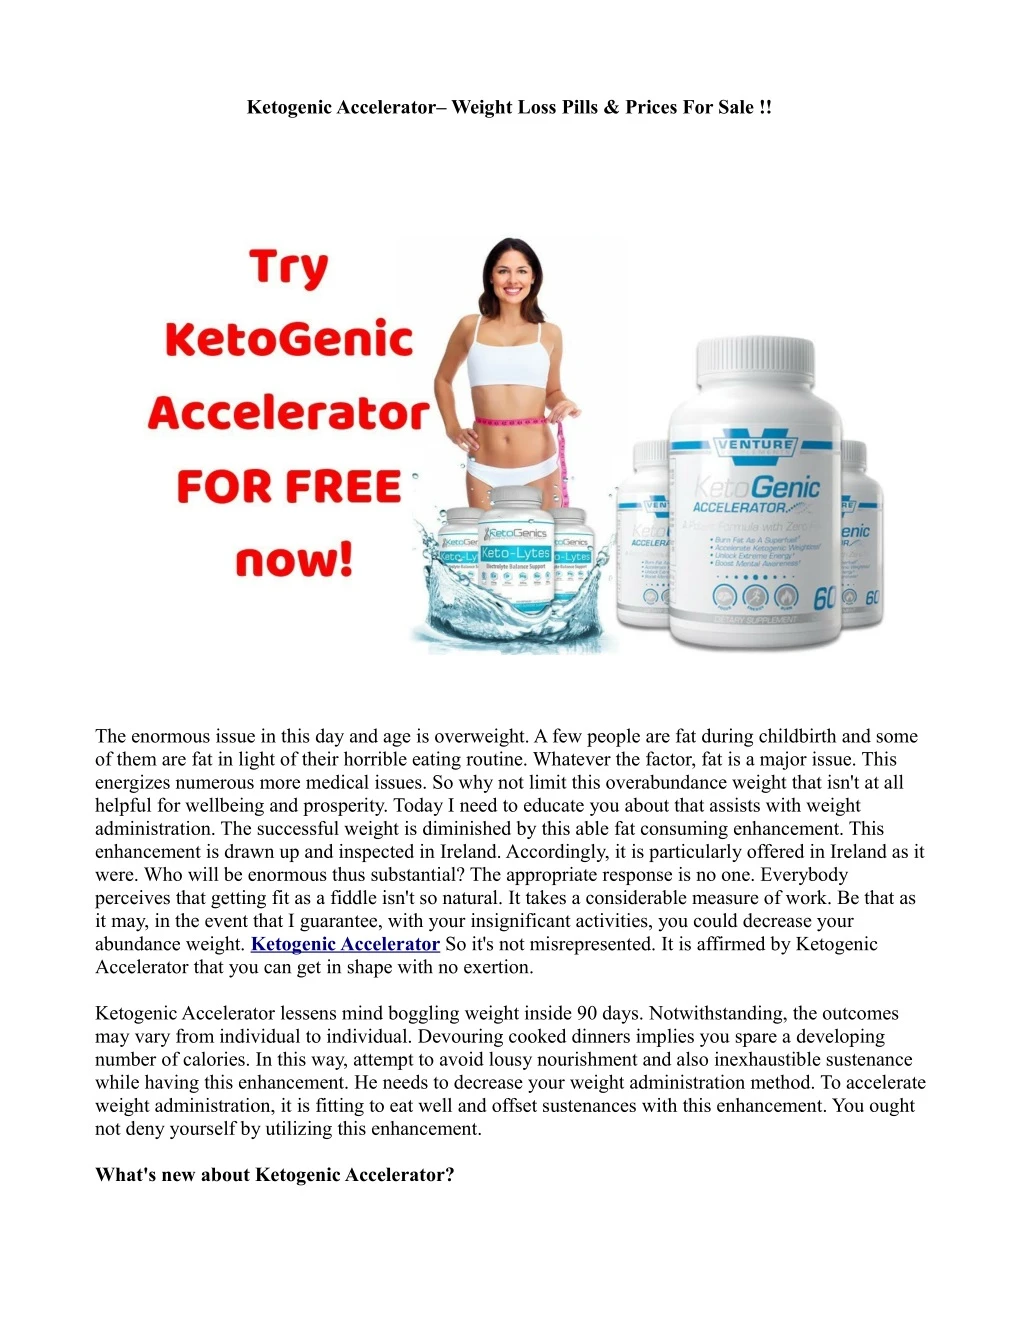 ketogenic accelerator weight loss pills prices